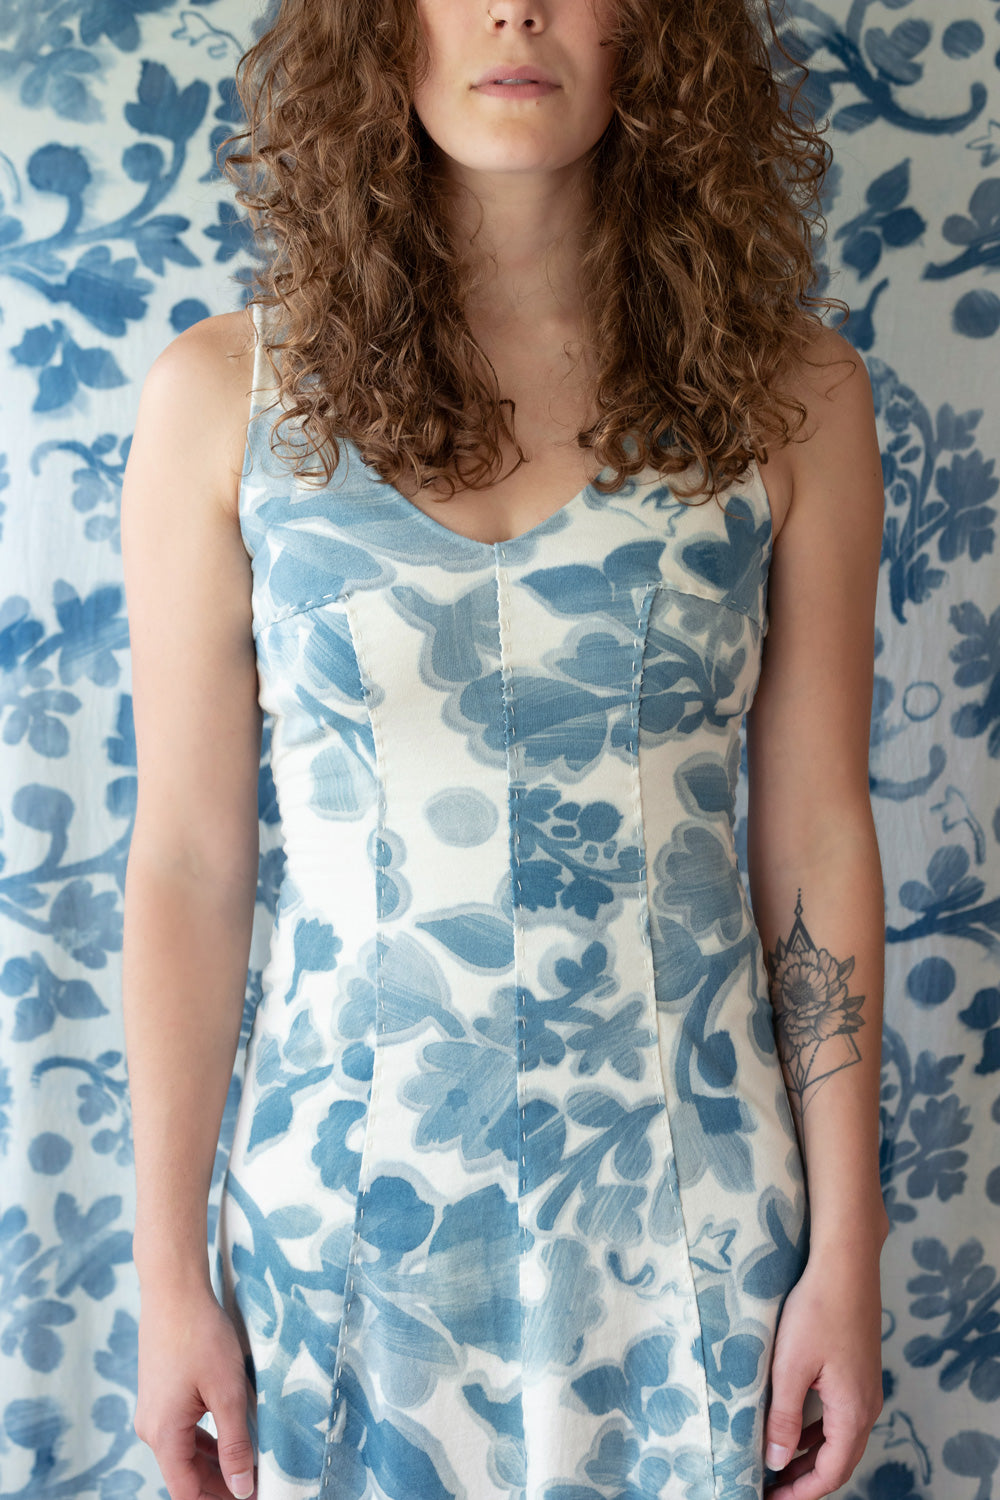 Alabama Chanin Niko Dress featuring hand-sewn seams and painted floral motif. Shown on model in Natural color with indigo flowers.